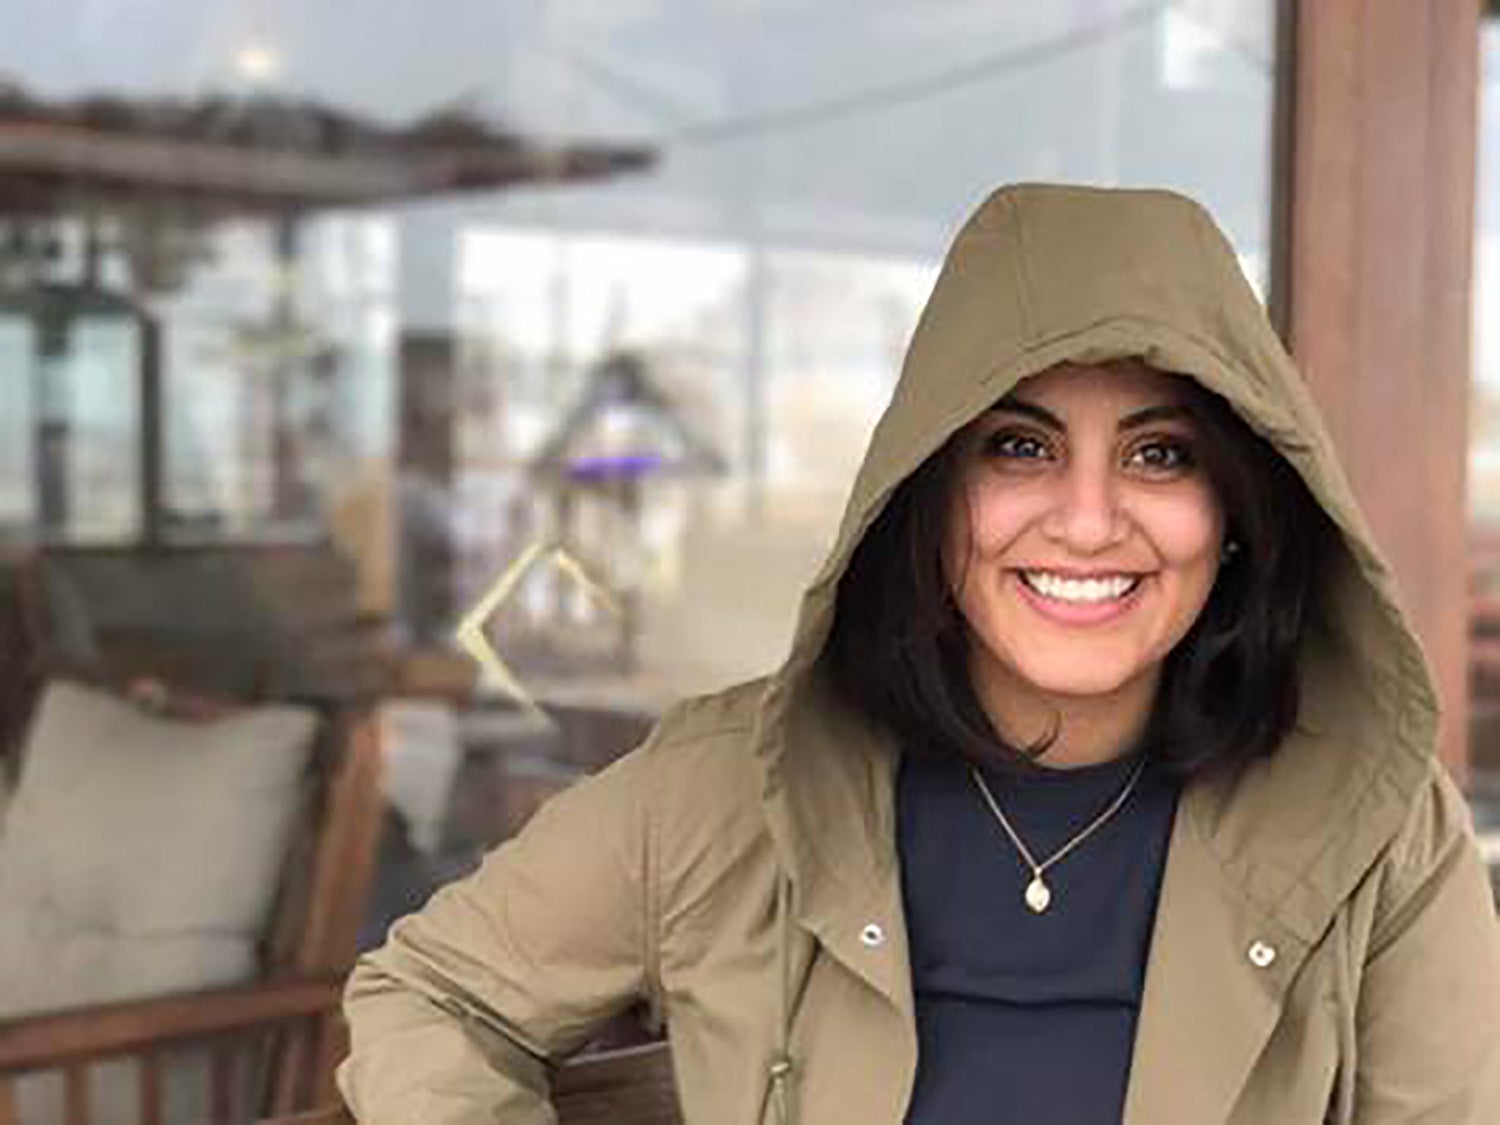 Loujain al-Hathloul, who successfully campaigned to win Saudi women the right to drive, has allegedly been tortured in prison and recently launched a hunger strike over her jail conditions